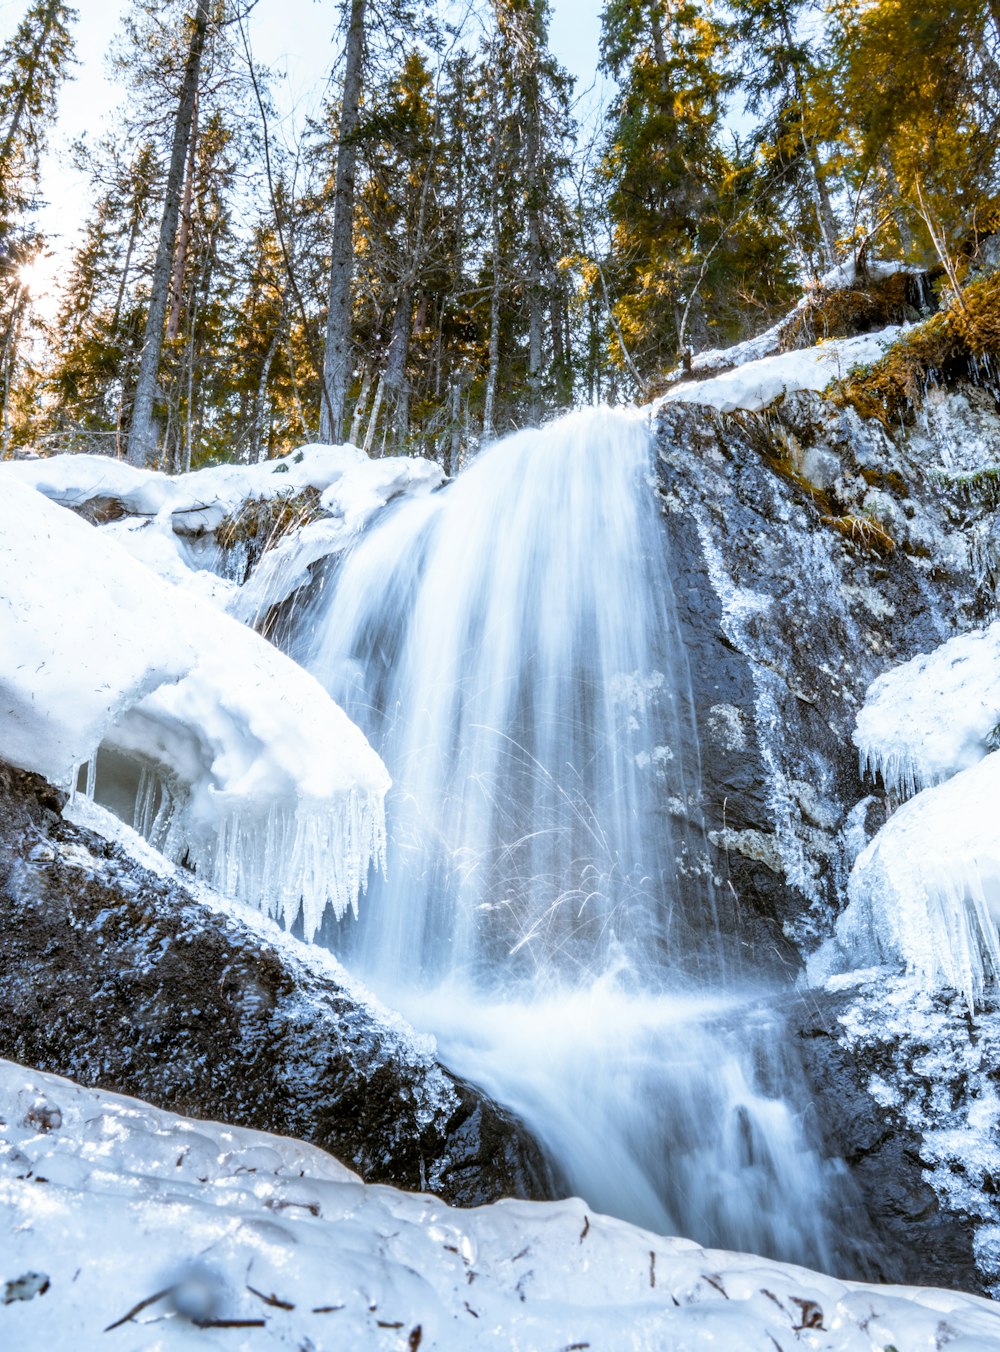 a small waterfall in a snowy forest